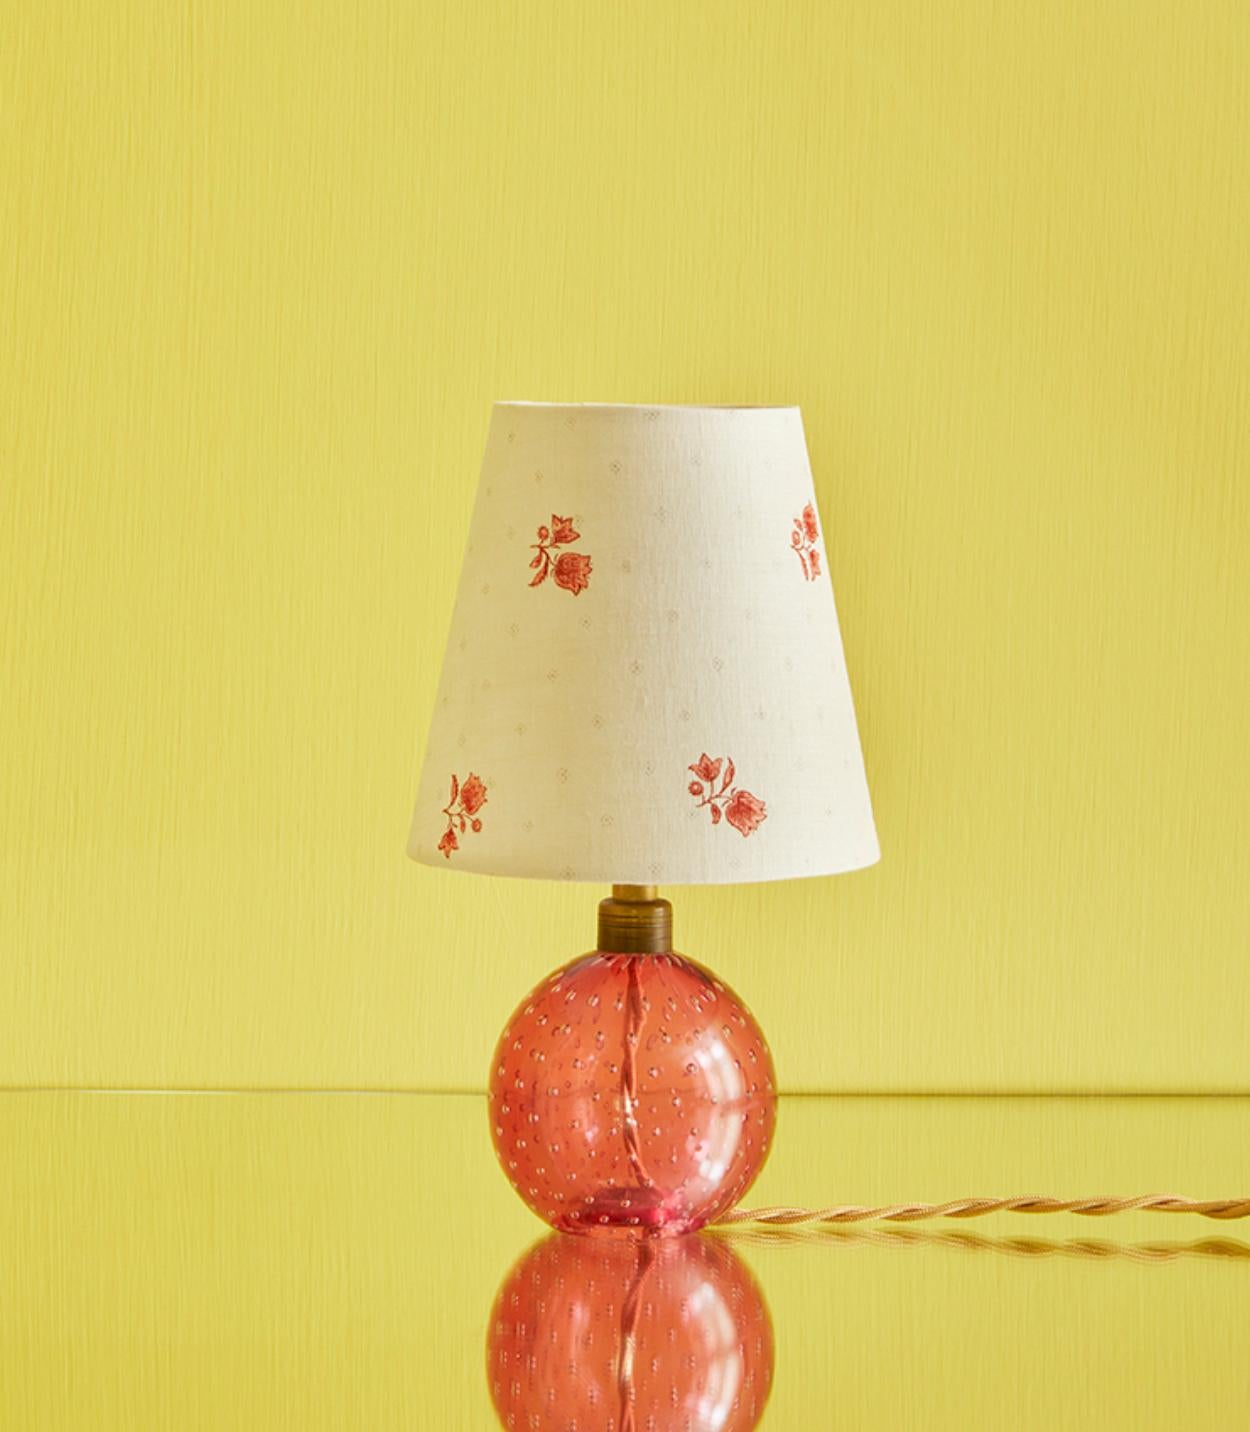 Italy, 1950s

Murano table lamp in pink bubble glass with customized shade by us.

Measures: H 29 x Ø 16 cm.

Only use a LED lightbulb for this lamp.